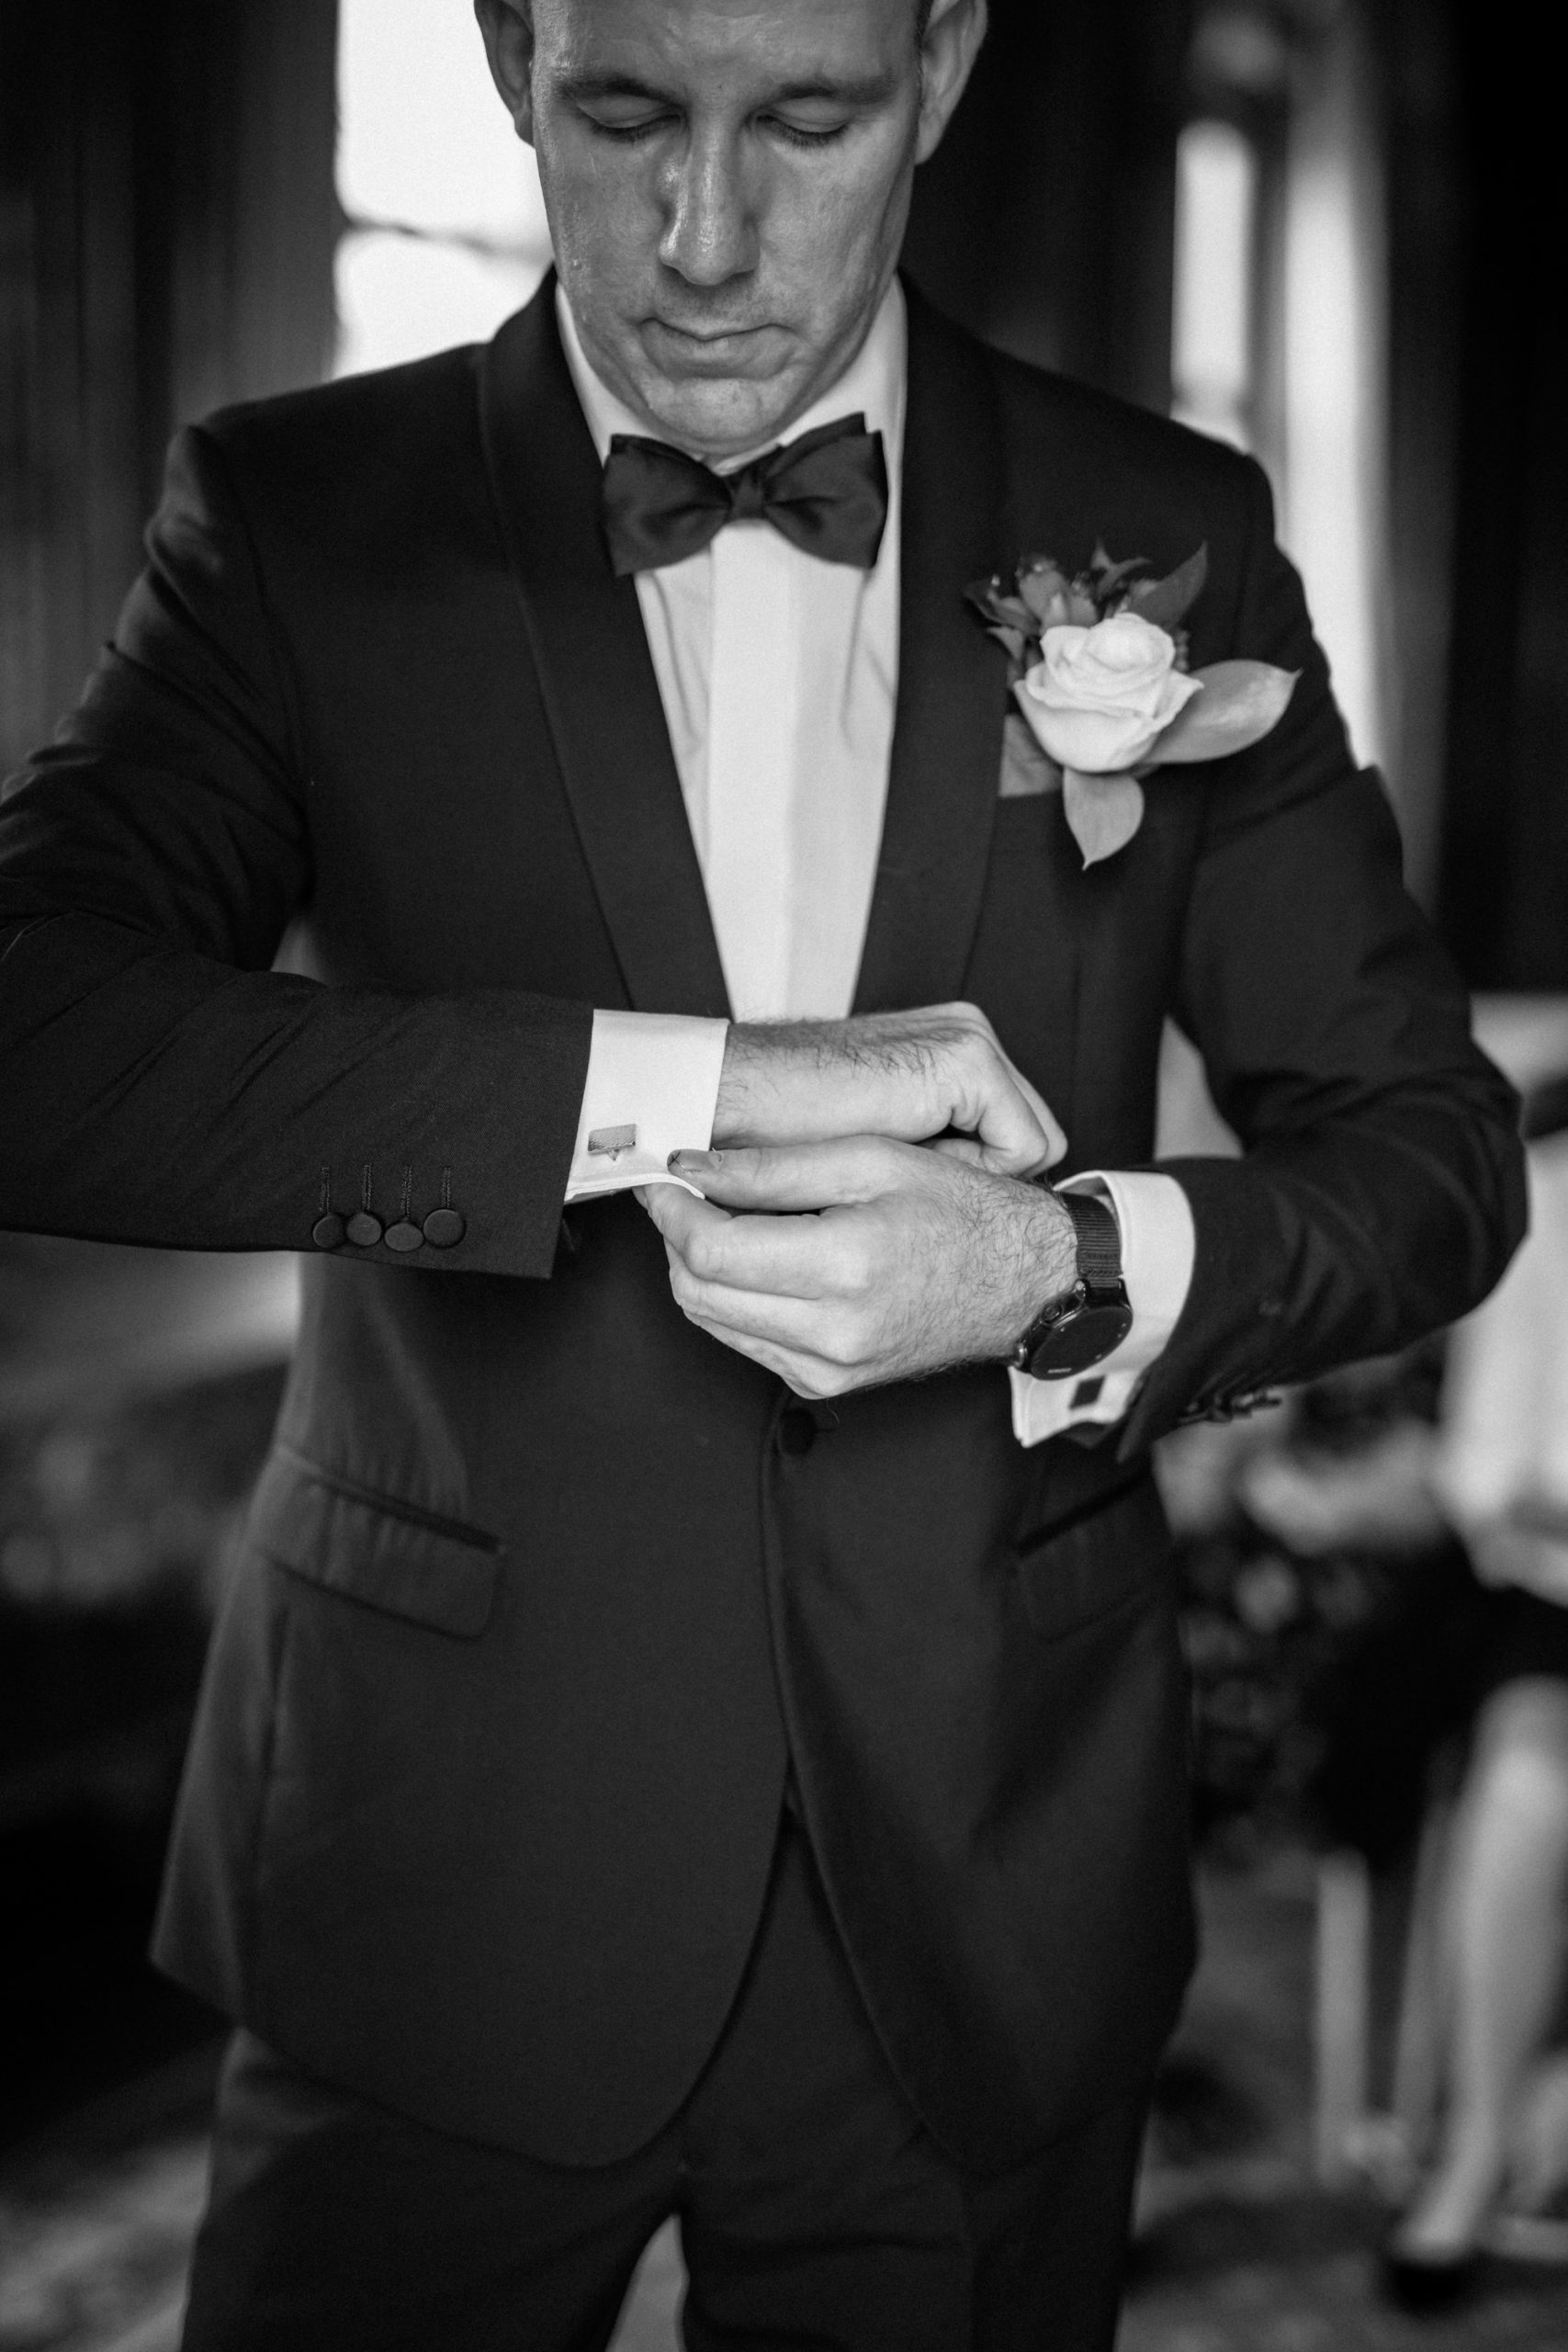 B&W. Cropped portrait of groom adjusting his cufflinks. Black suit and bow tie